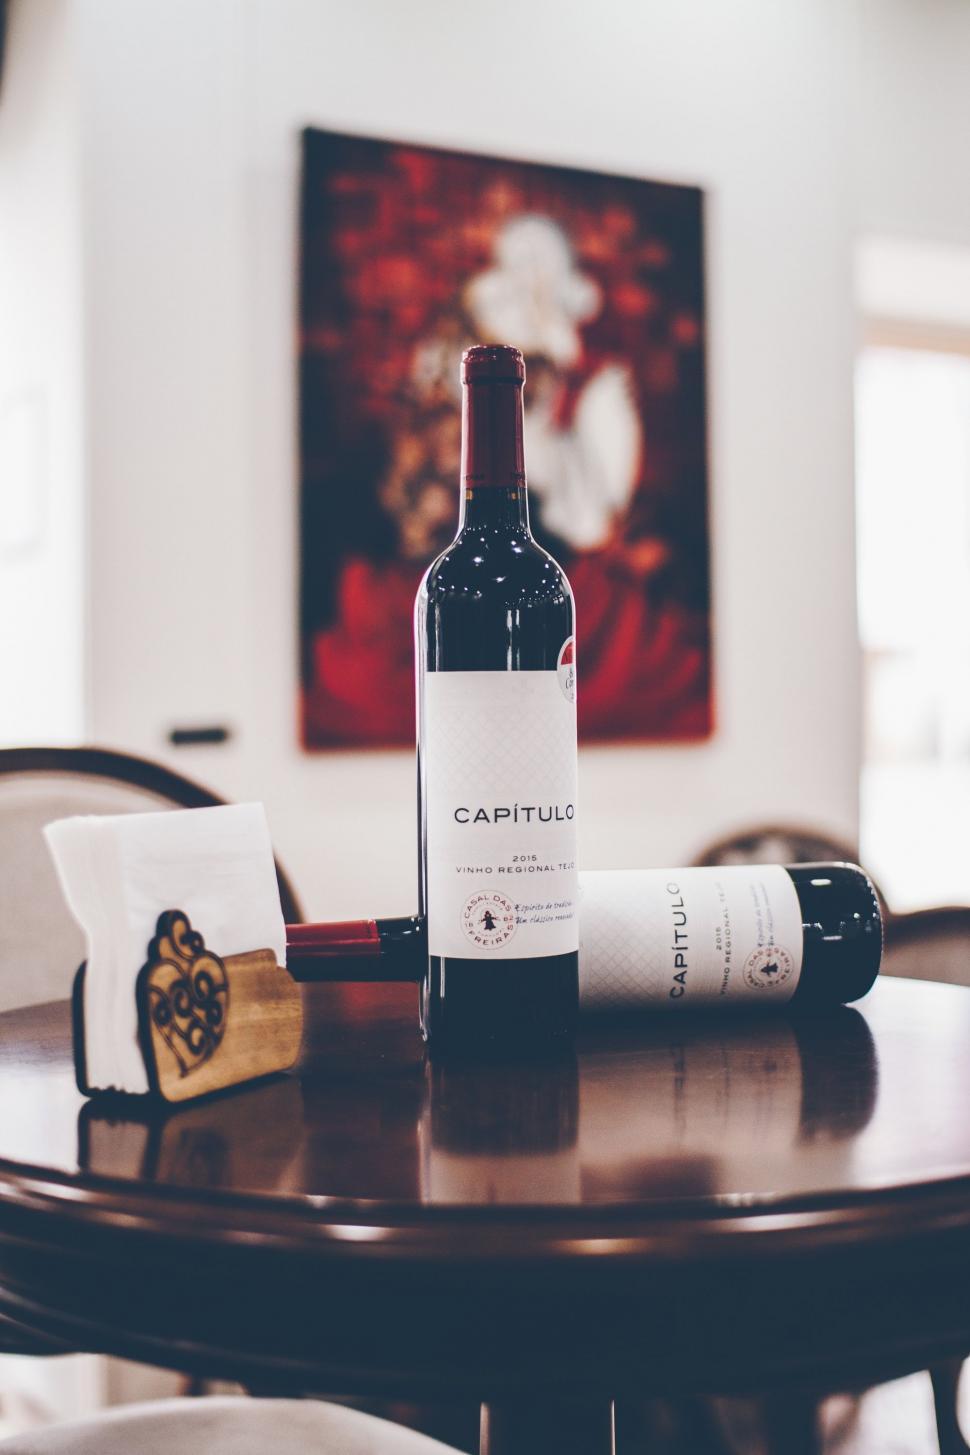 Free Image of Bottle of Wine on Wooden Table 